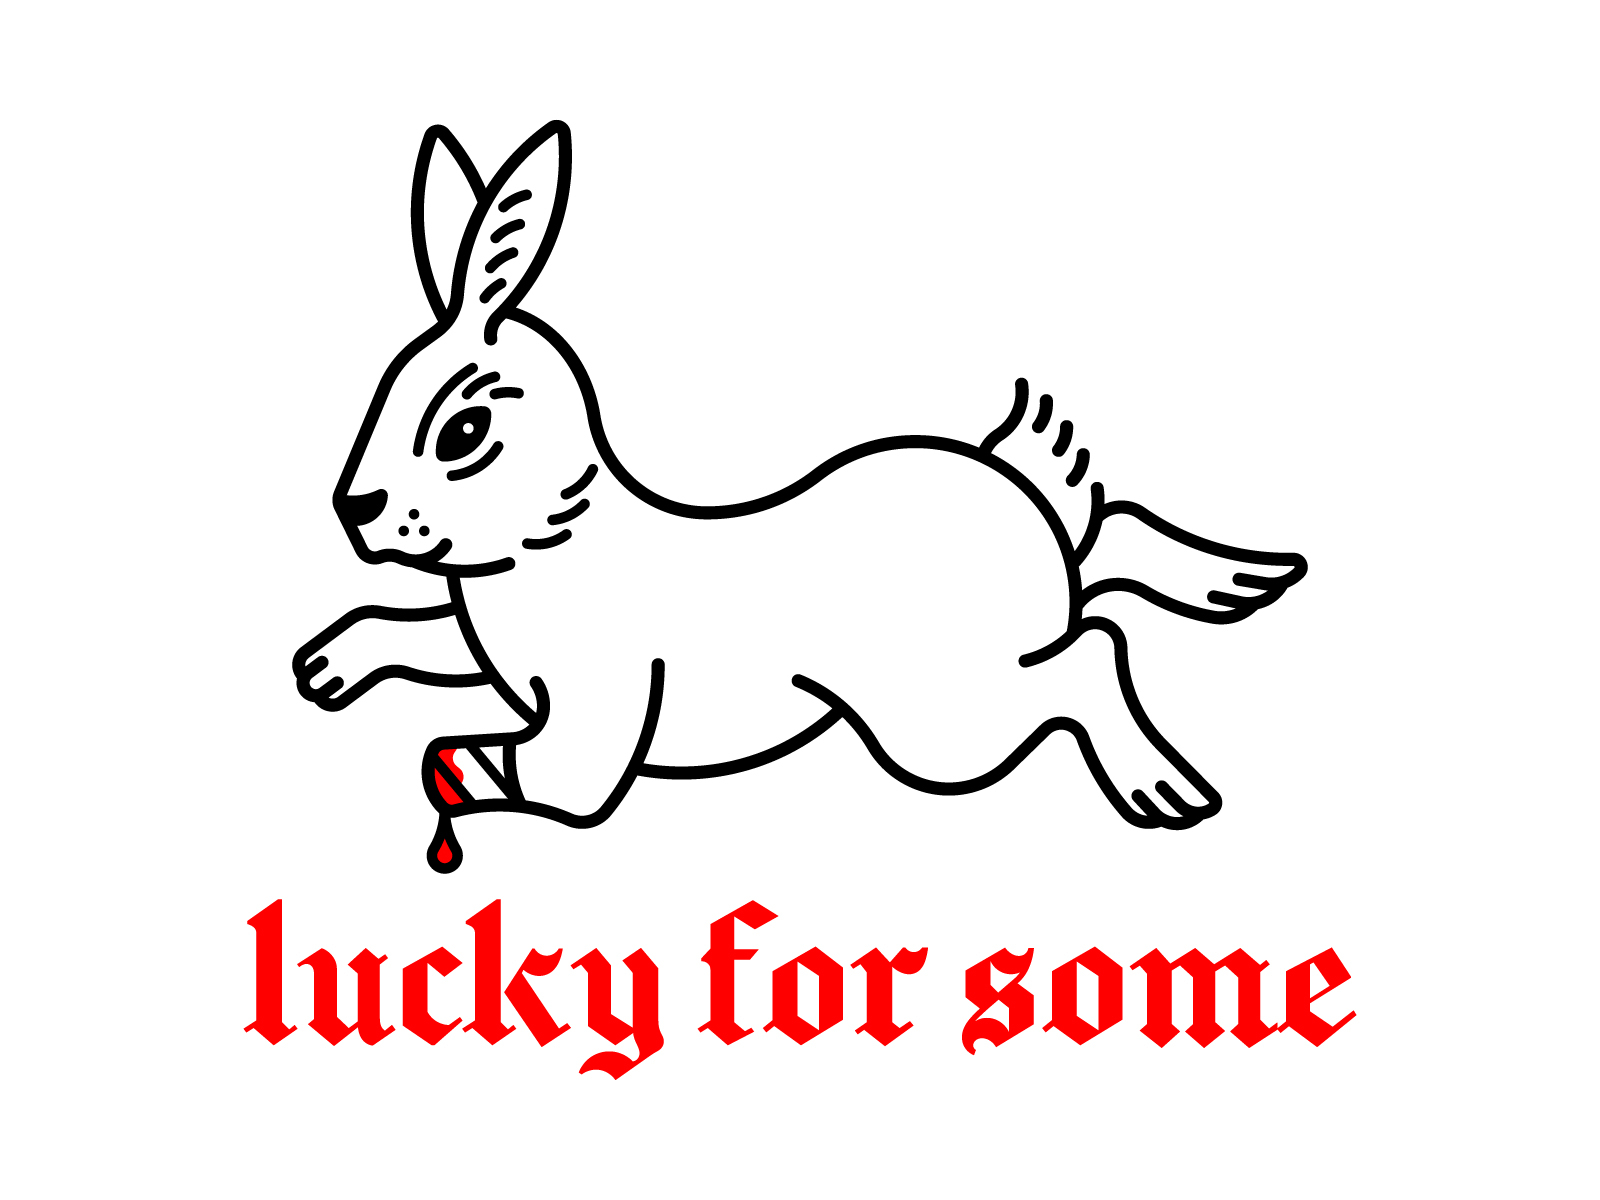 Lucky for some bleeding blood graphic design illustration lucky rabbit foot rabbit tattoo traditional tattoo